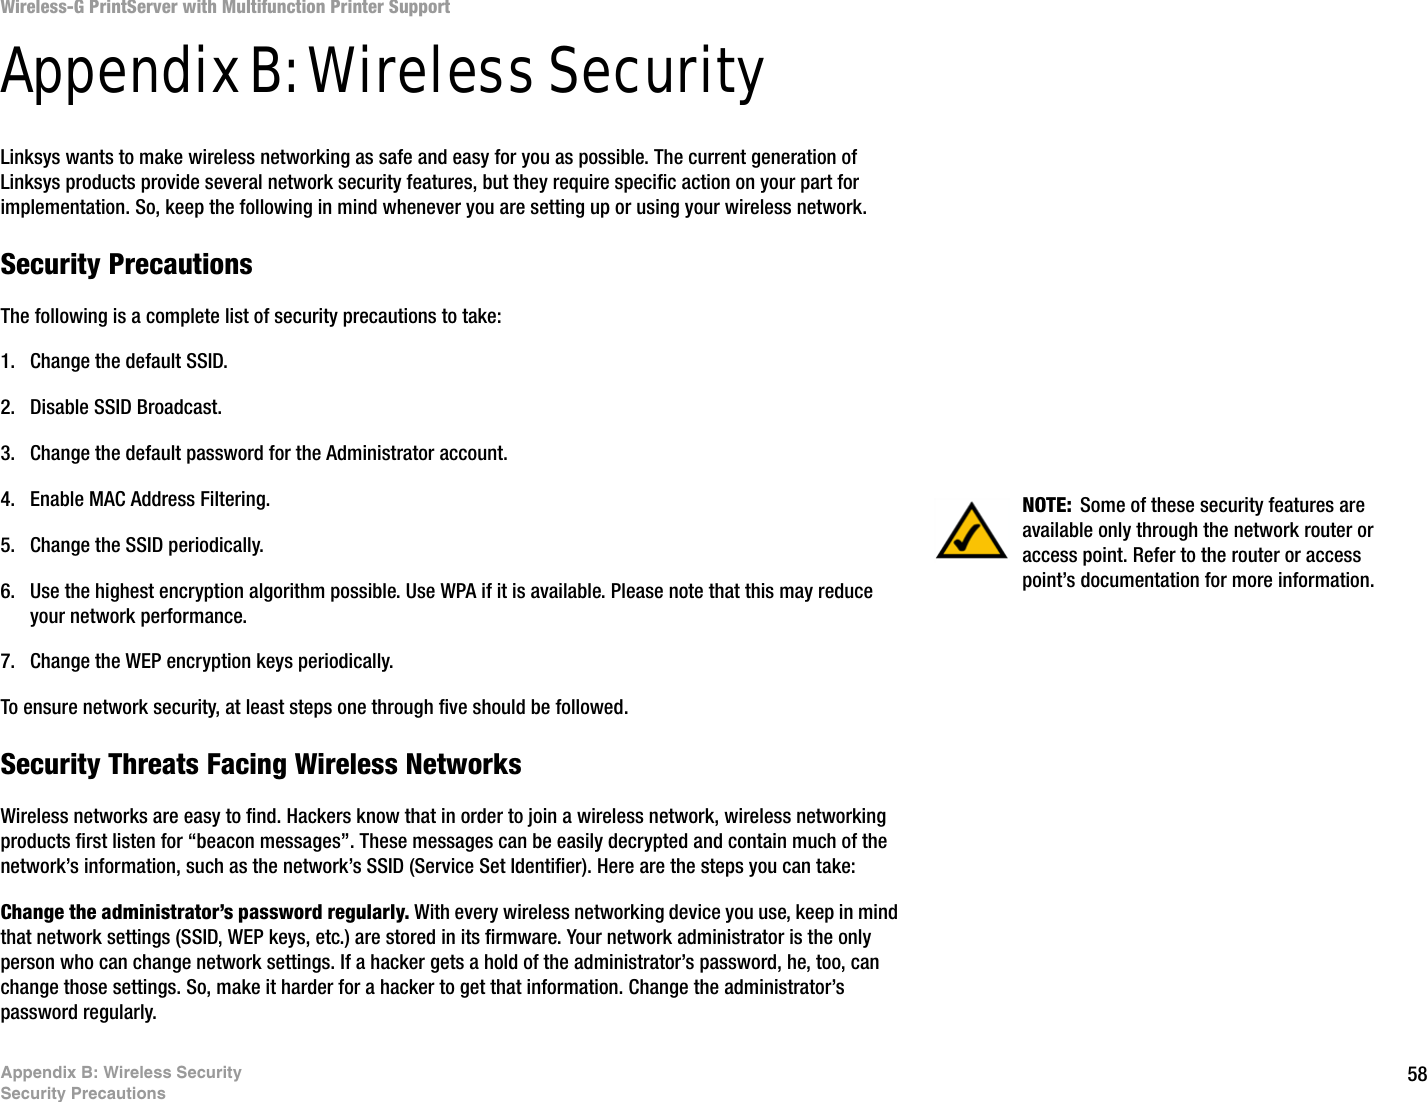 58Appendix B: Wireless SecuritySecurity PrecautionsWireless-G PrintServer with Multifunction Printer SupportAppendix B: Wireless SecurityLinksys wants to make wireless networking as safe and easy for you as possible. The current generation of Linksys products provide several network security features, but they require specific action on your part for implementation. So, keep the following in mind whenever you are setting up or using your wireless network.Security PrecautionsThe following is a complete list of security precautions to take:1. Change the default SSID. 2. Disable SSID Broadcast. 3. Change the default password for the Administrator account. 4. Enable MAC Address Filtering. 5. Change the SSID periodically. 6. Use the highest encryption algorithm possible. Use WPA if it is available. Please note that this may reduce your network performance. 7. Change the WEP encryption keys periodically. To ensure network security, at least steps one through five should be followed.Security Threats Facing Wireless Networks Wireless networks are easy to find. Hackers know that in order to join a wireless network, wireless networking products first listen for “beacon messages”. These messages can be easily decrypted and contain much of the network’s information, such as the network’s SSID (Service Set Identifier). Here are the steps you can take:Change the administrator’s password regularly. With every wireless networking device you use, keep in mind that network settings (SSID, WEP keys, etc.) are stored in its firmware. Your network administrator is the only person who can change network settings. If a hacker gets a hold of the administrator’s password, he, too, can change those settings. So, make it harder for a hacker to get that information. Change the administrator’s password regularly.NOTE: Some of these security features are available only through the network router or access point. Refer to the router or access point’s documentation for more information.